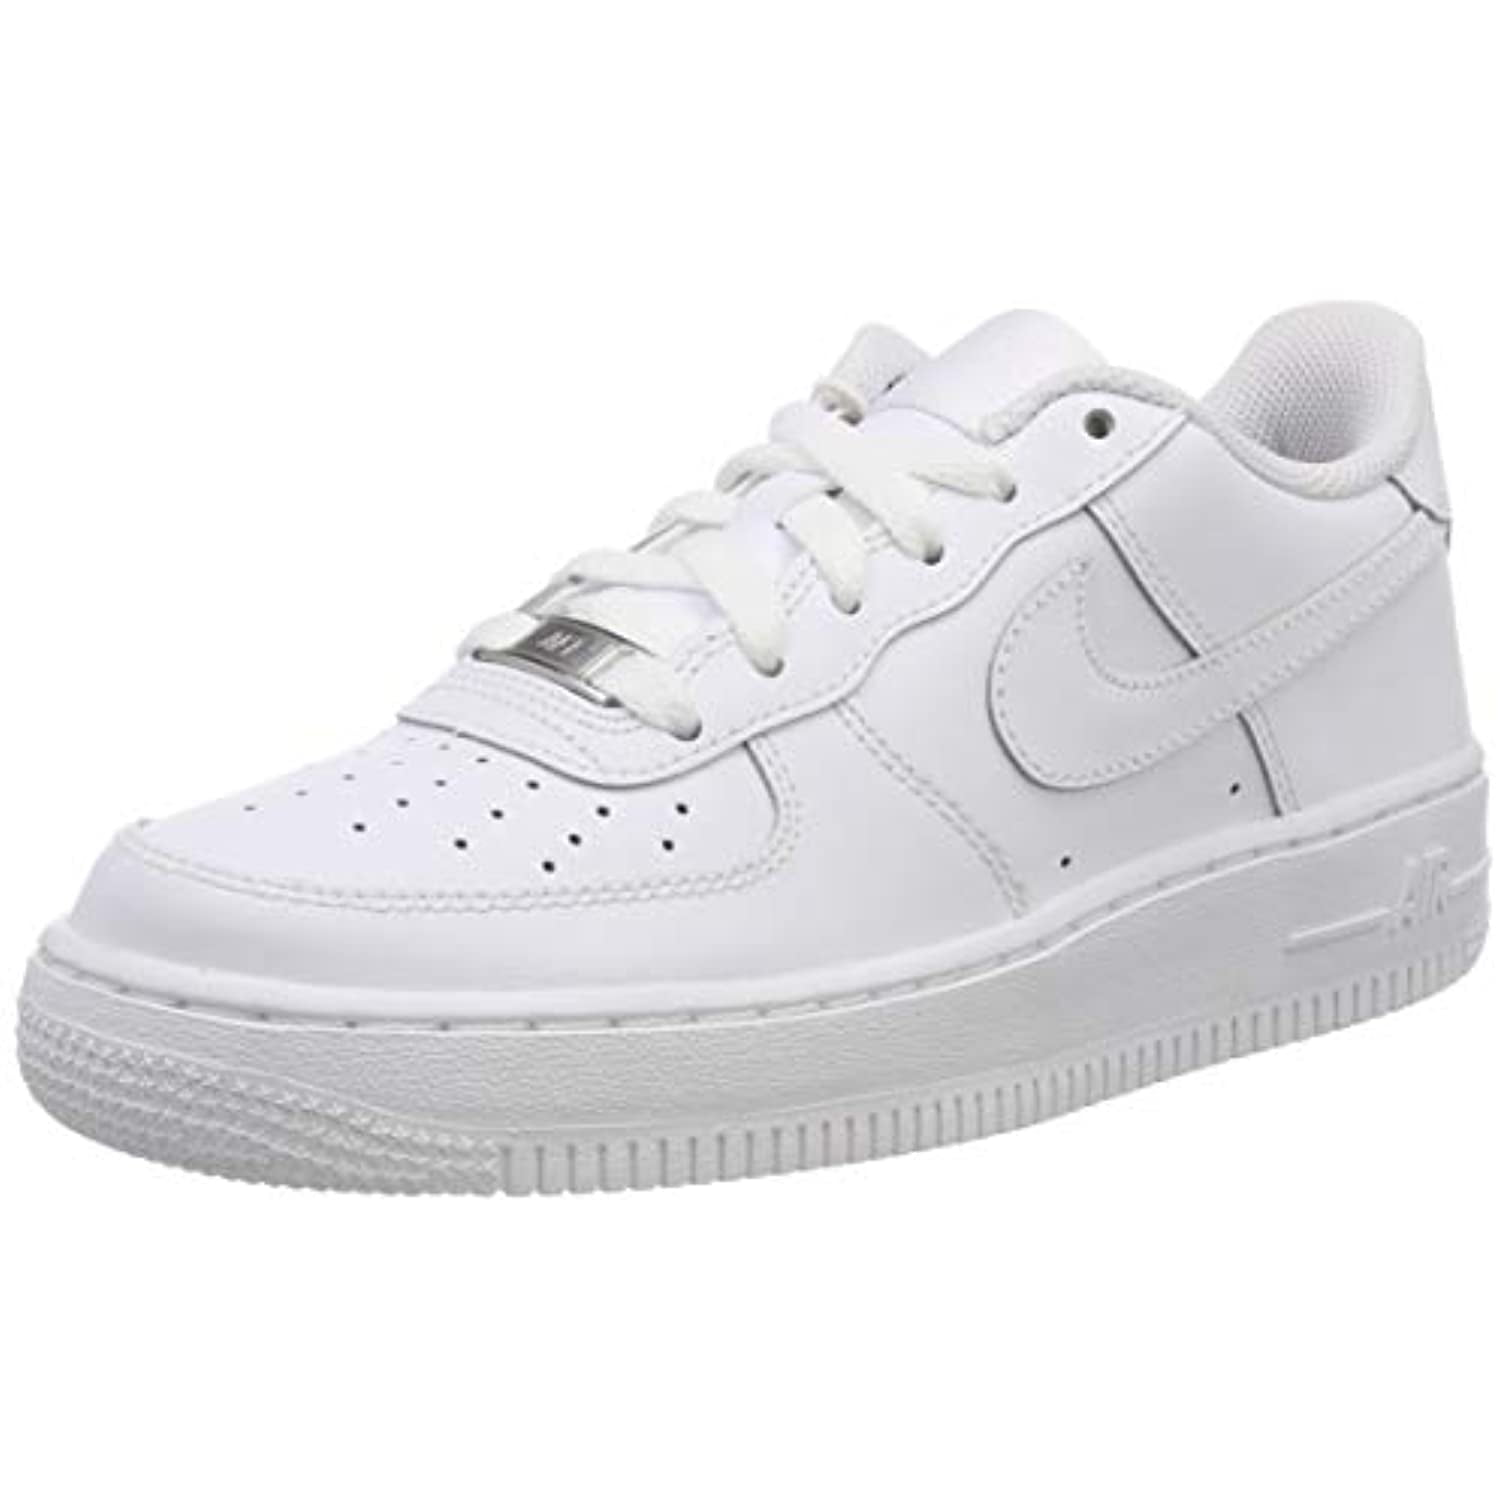 air force ones near me in store